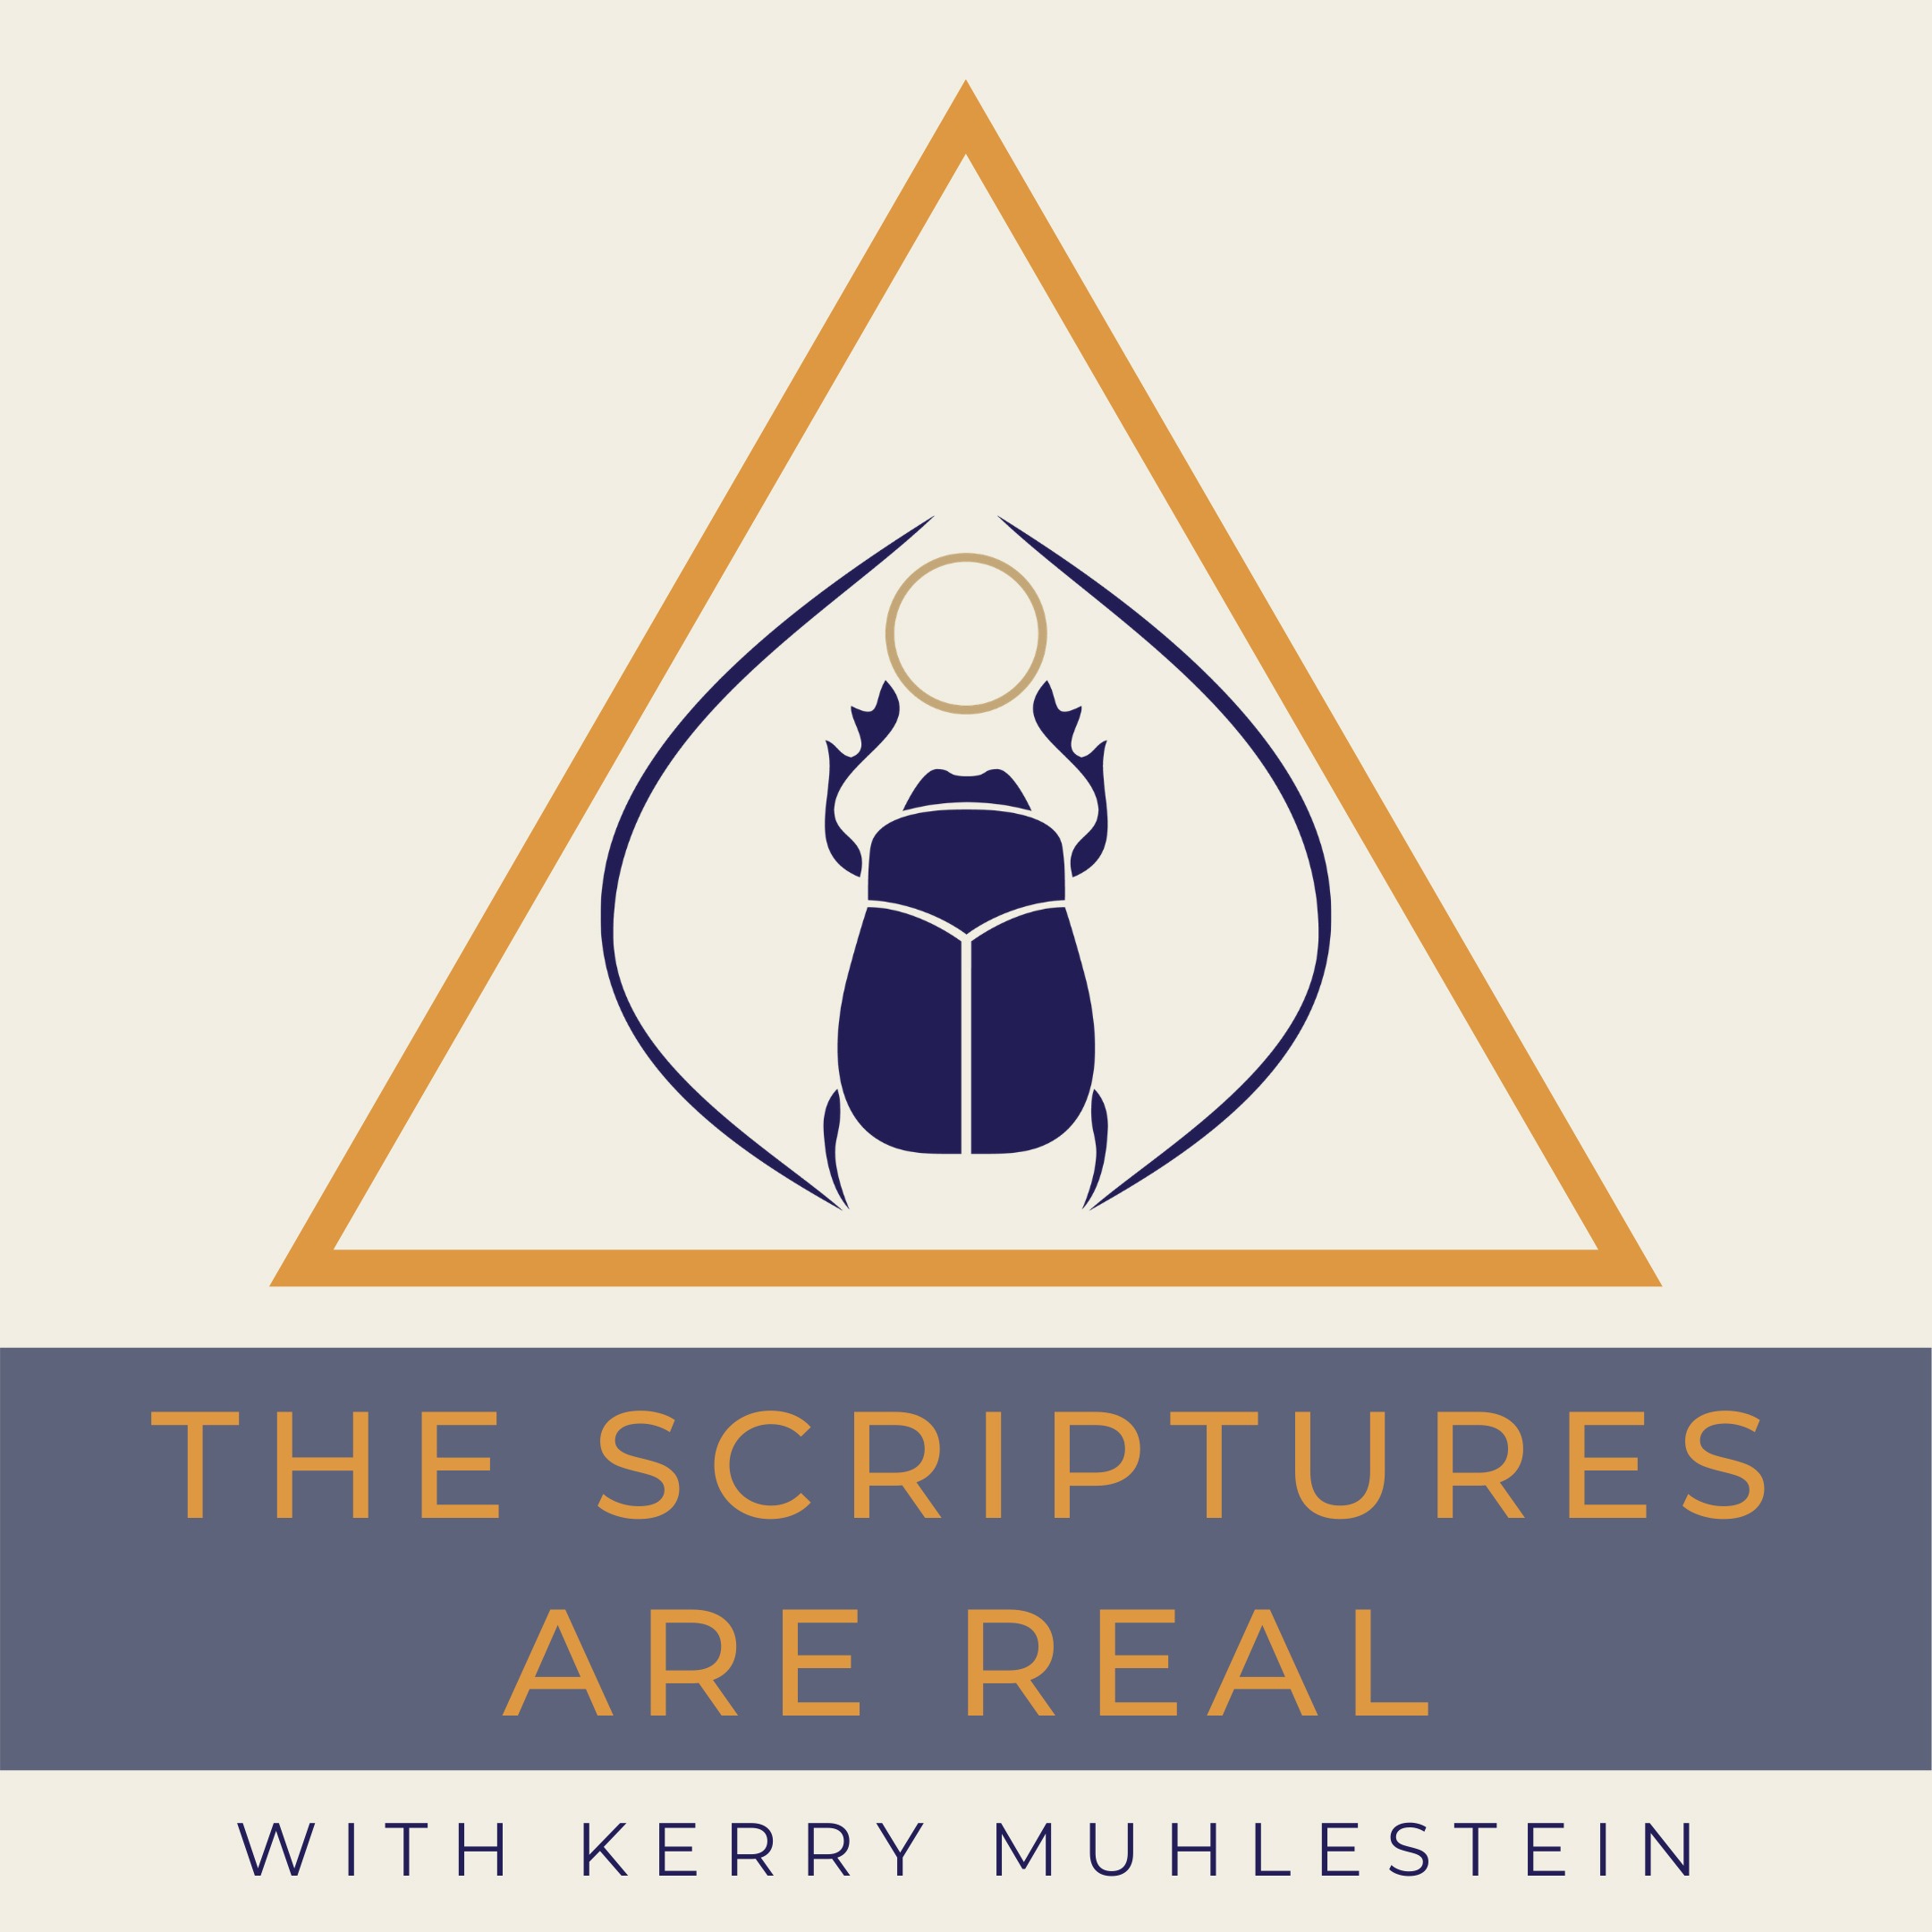 S3 E 19 Dan Debenham, Our Connection with God, and Relative Race teaching about Christ (Week of Feb. 19, 2nd episode)